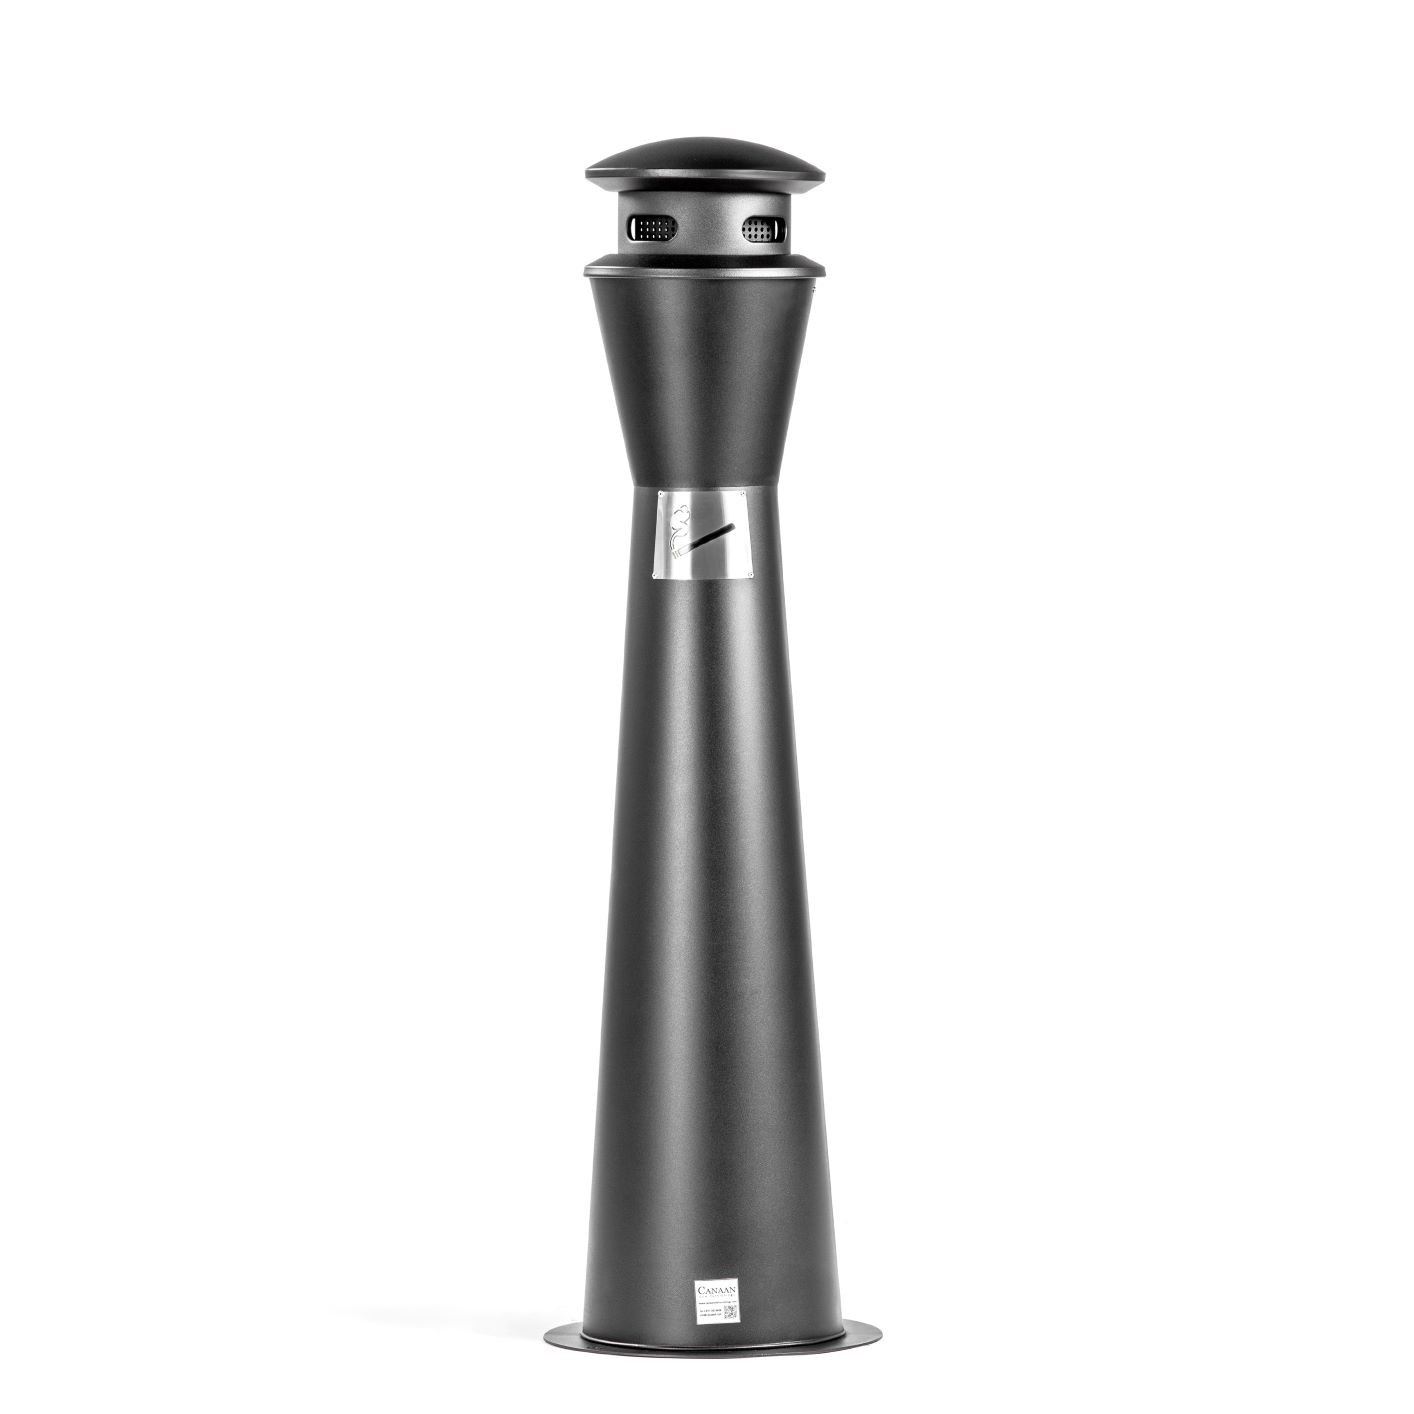 Black free standing outdoor ashtray tower with cap cam 388